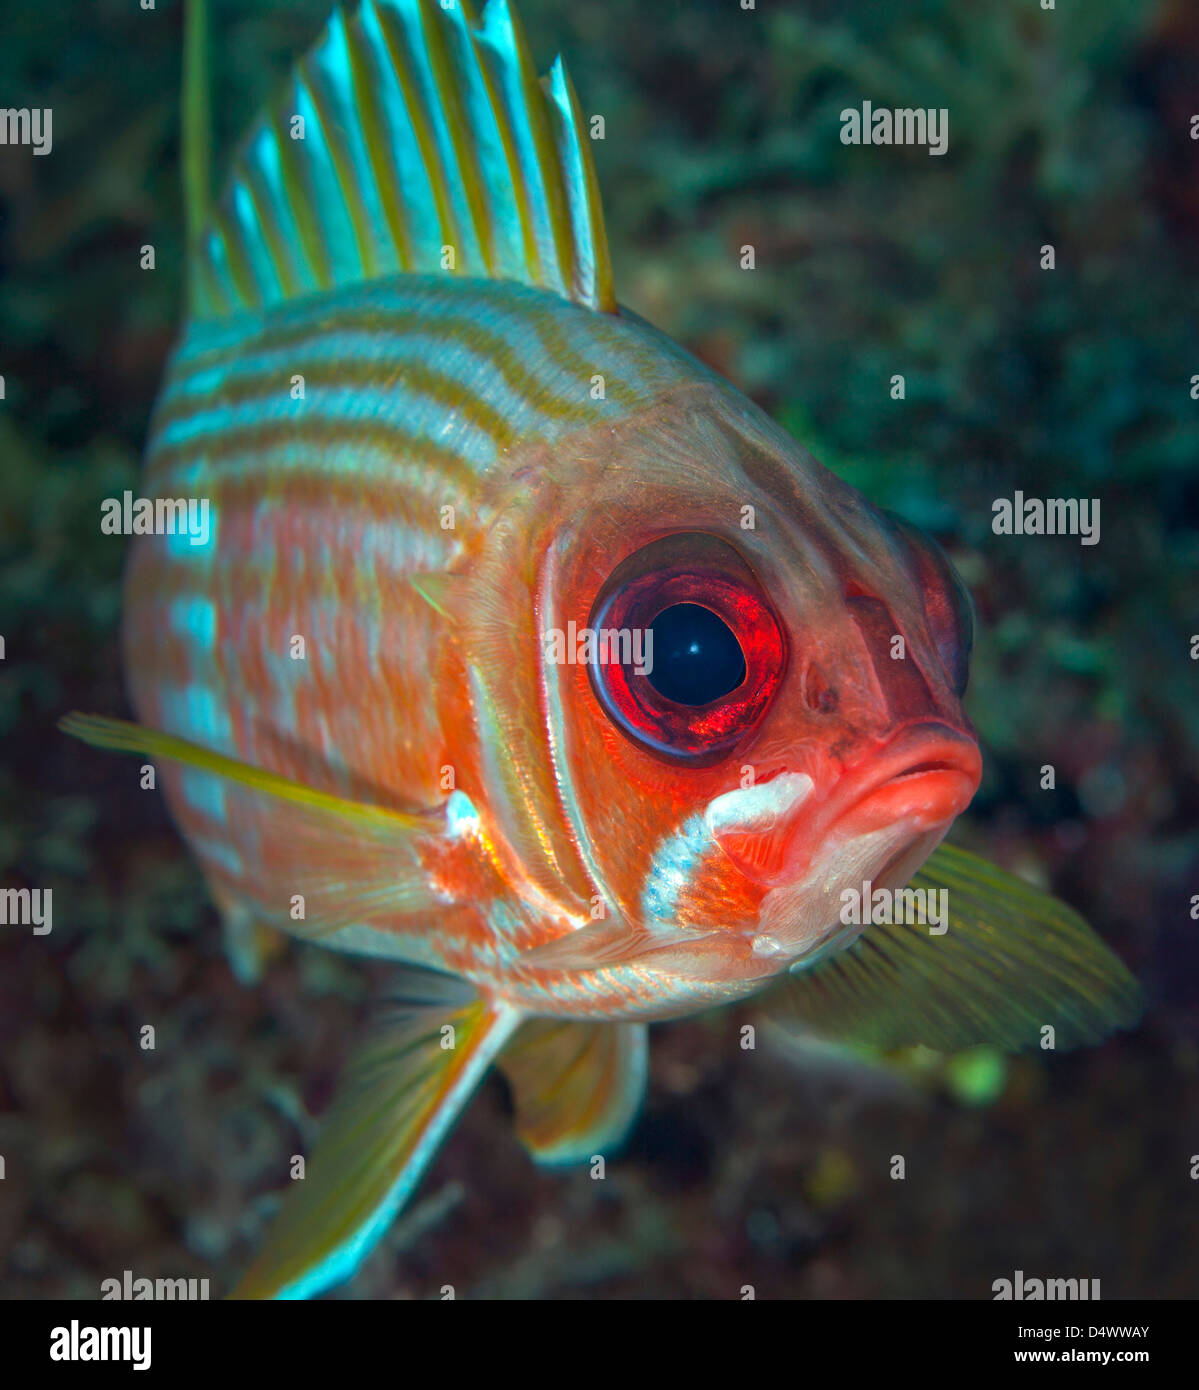 A squirrelfish turns and looks close into the camera off the coast of Key Largo, Florida. Stock Photo